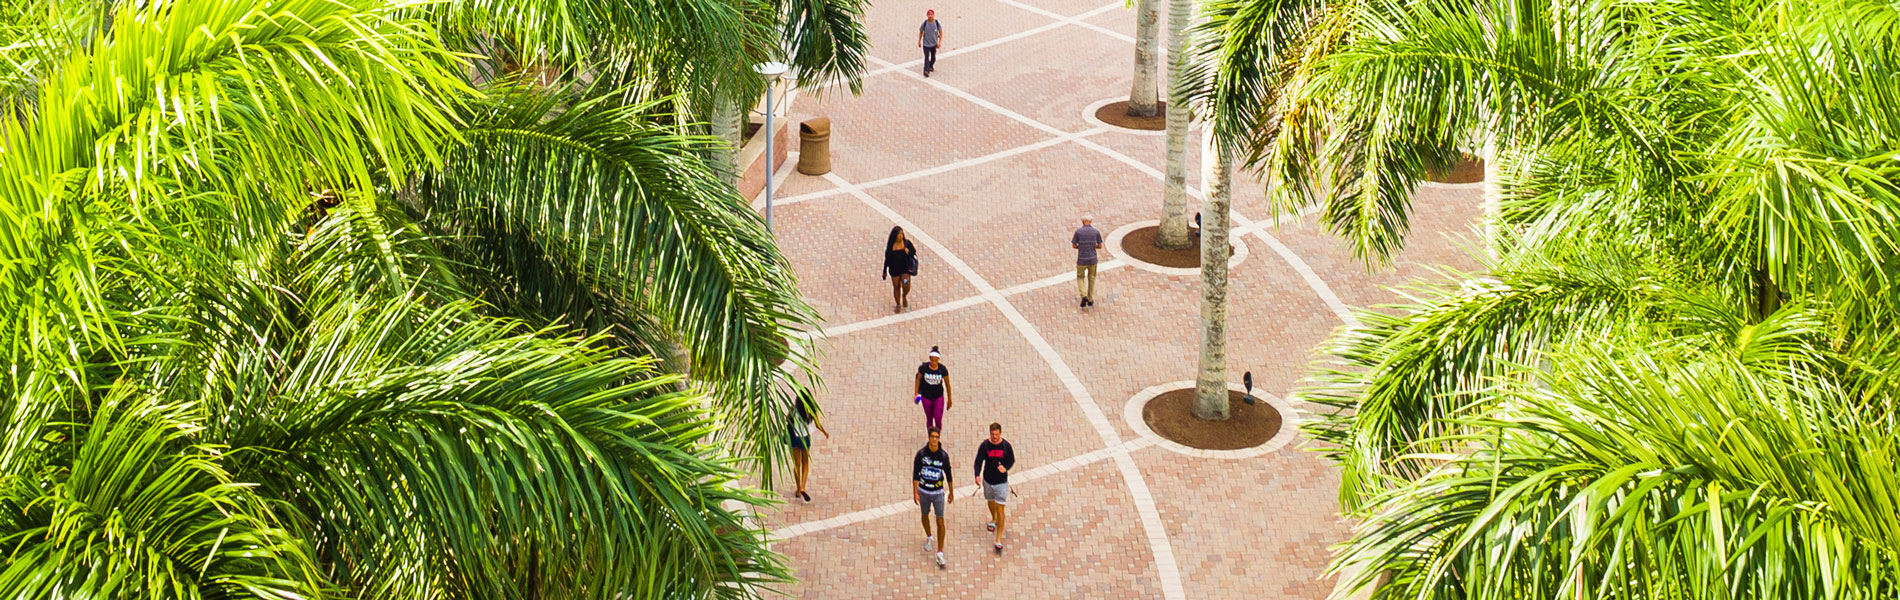 NSU campus walkway top view and palm trees view